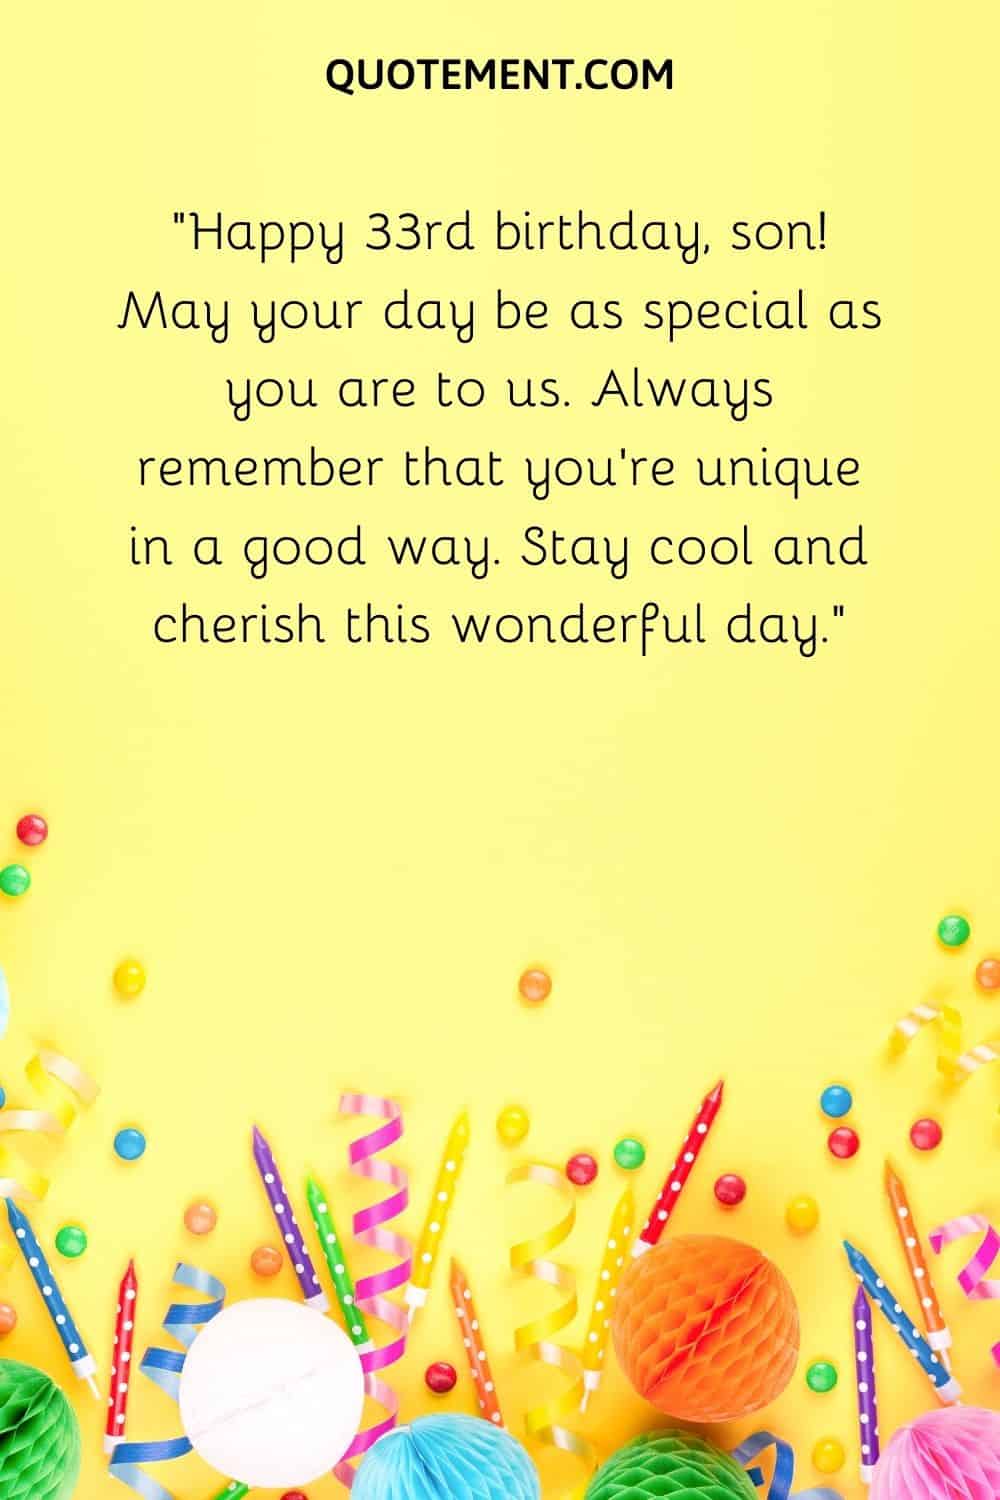 May your day be as special as you are to us